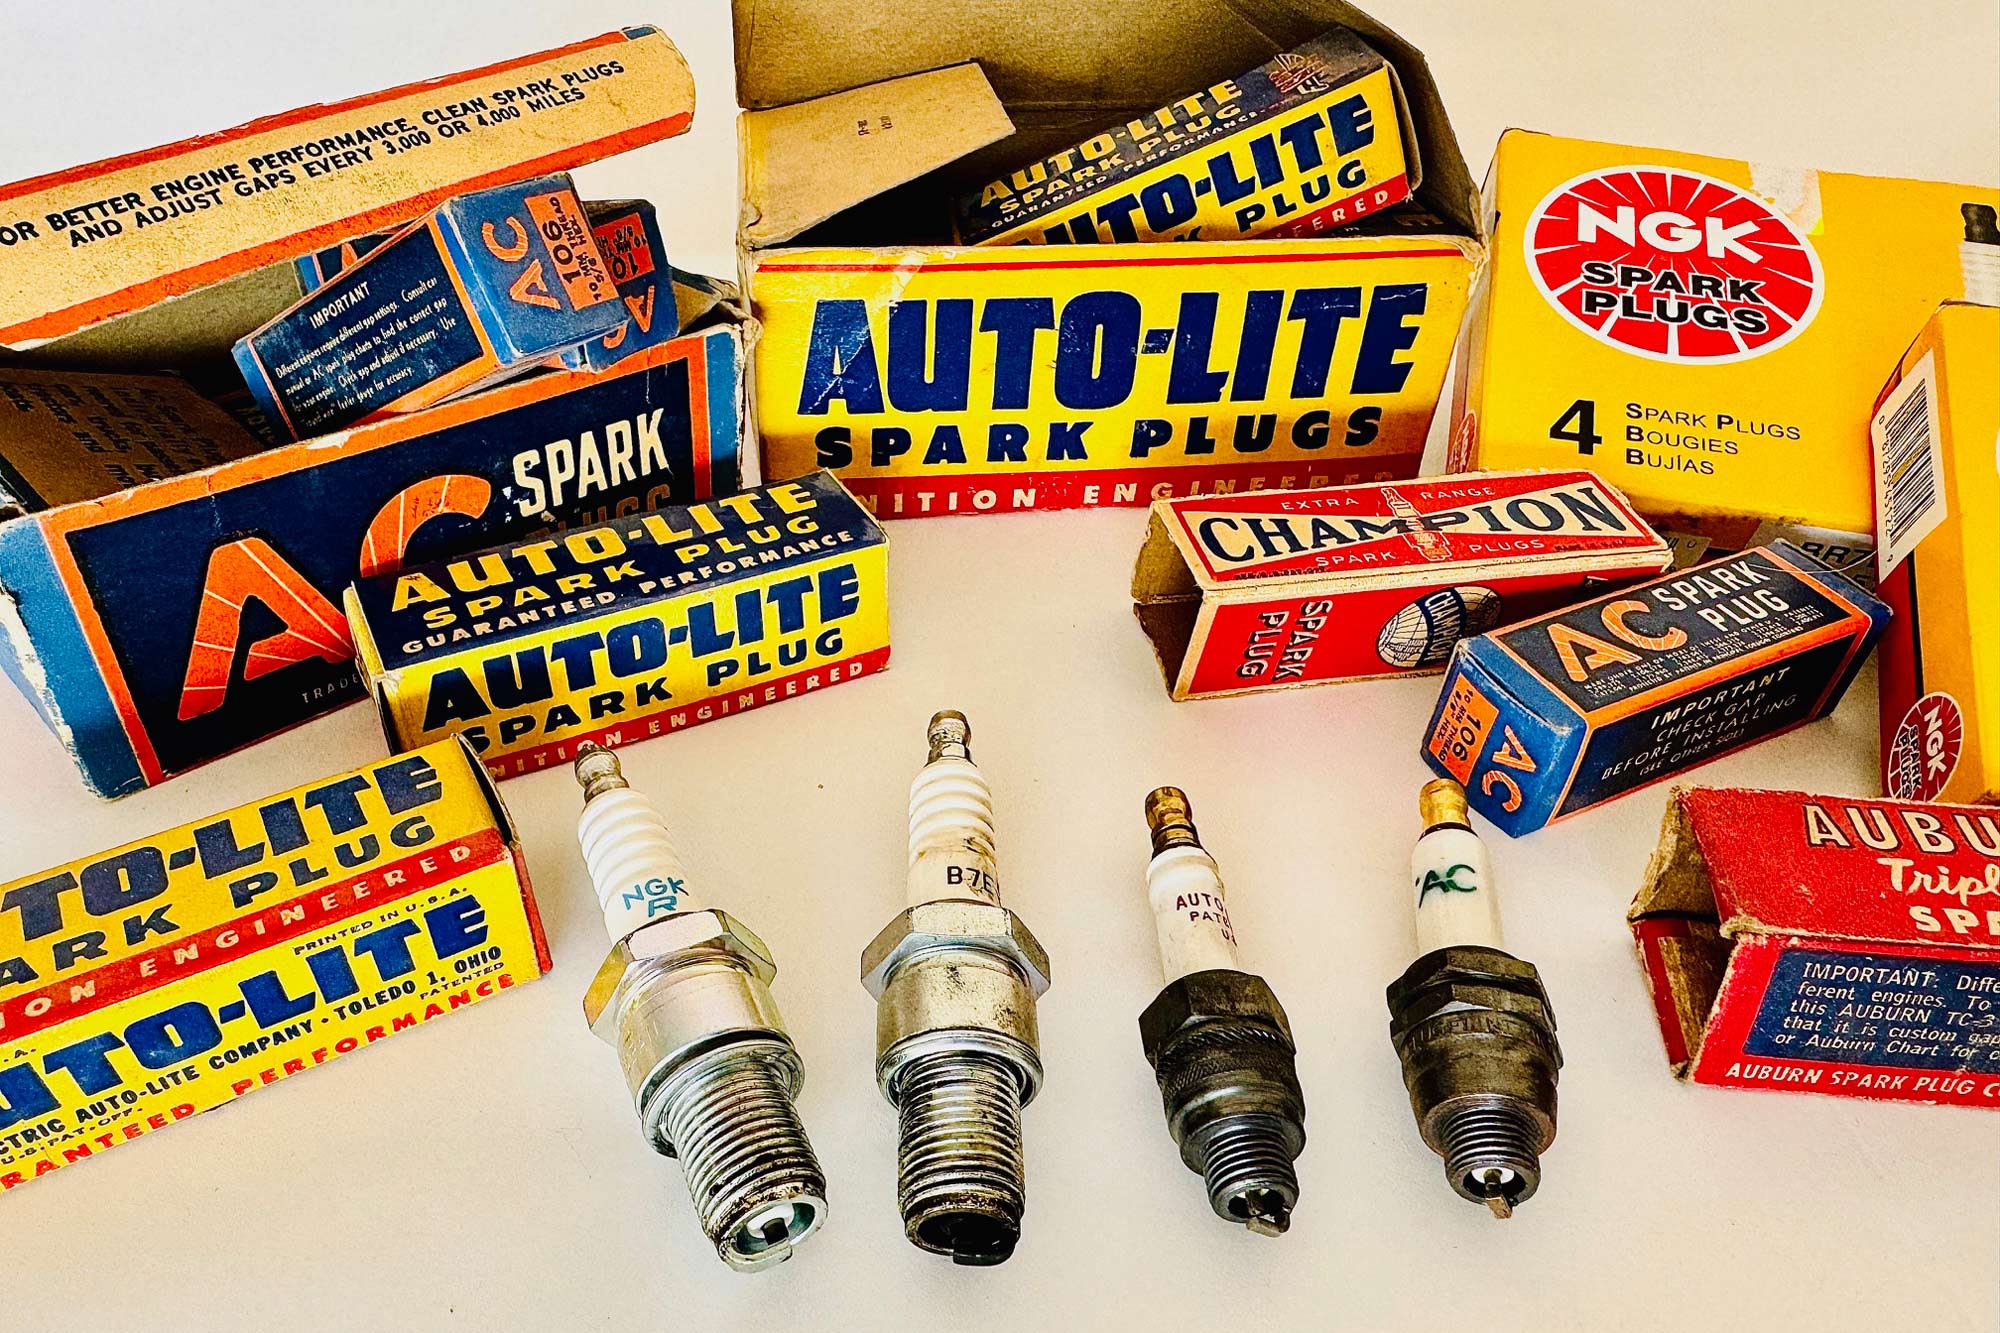 Several spark plugs and spark plug boxes